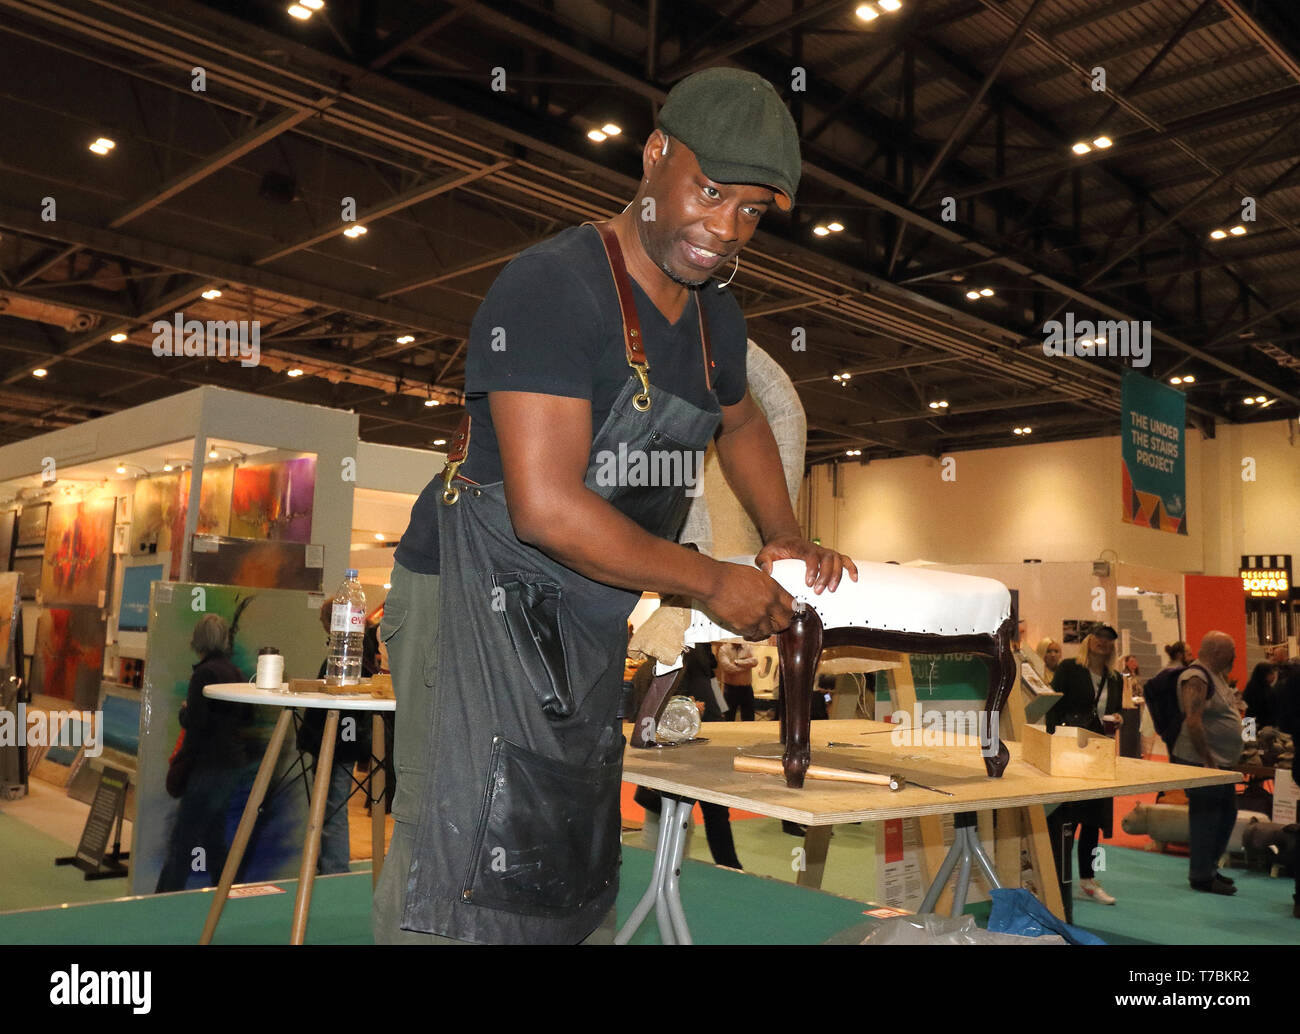 A Man Seen Demonstrating A Reuse Product During The Exhibition